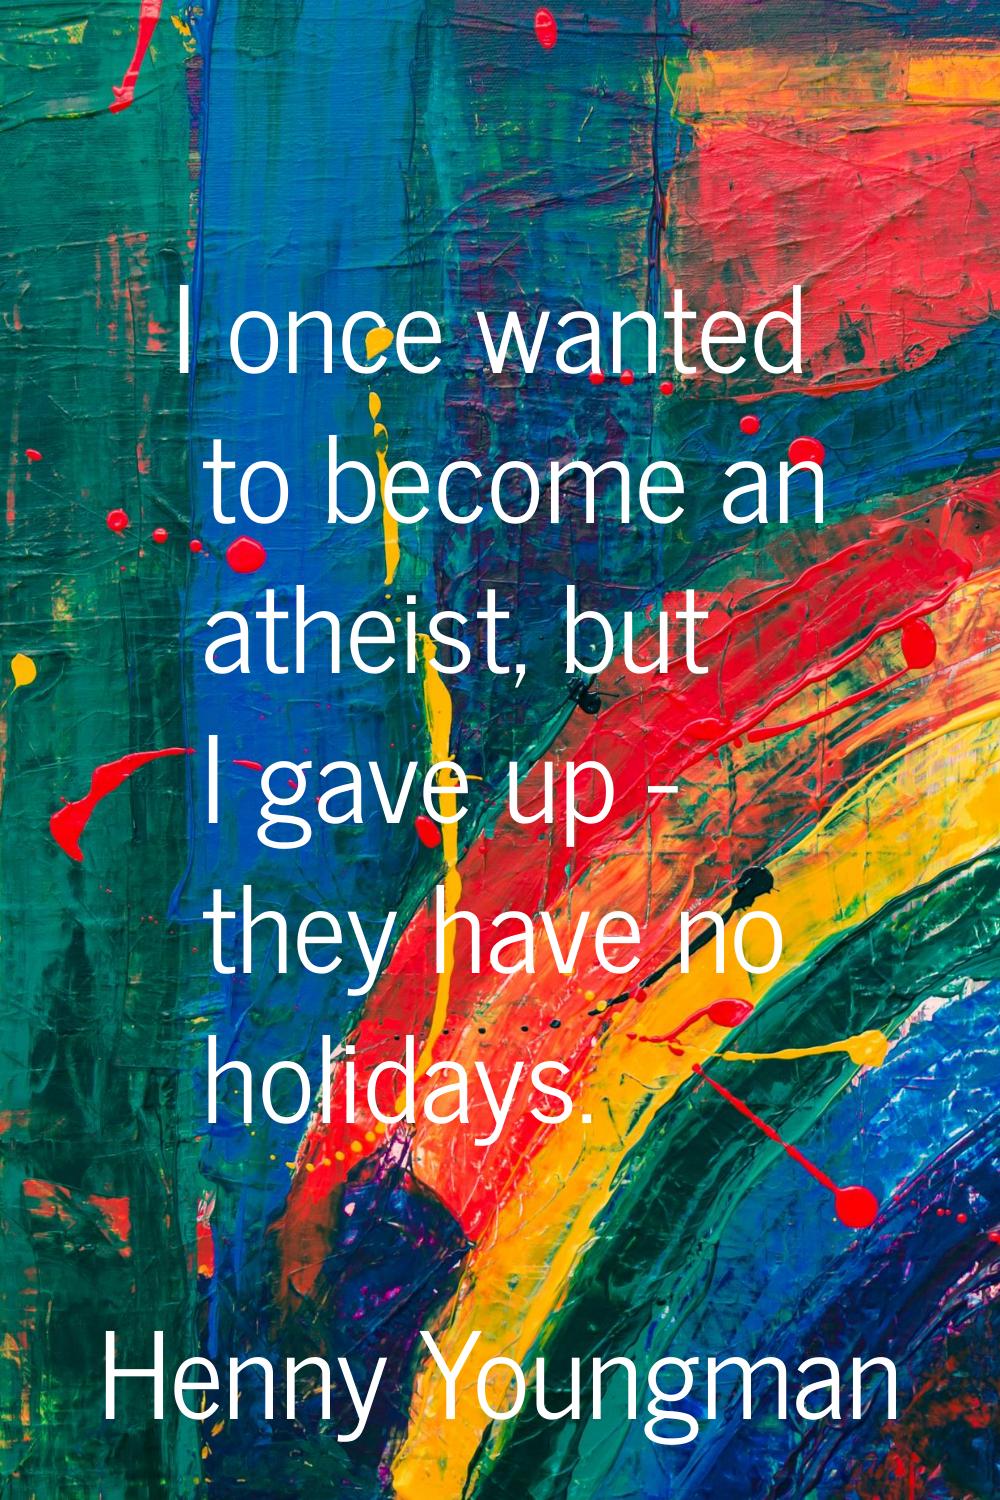 I once wanted to become an atheist, but I gave up - they have no holidays.